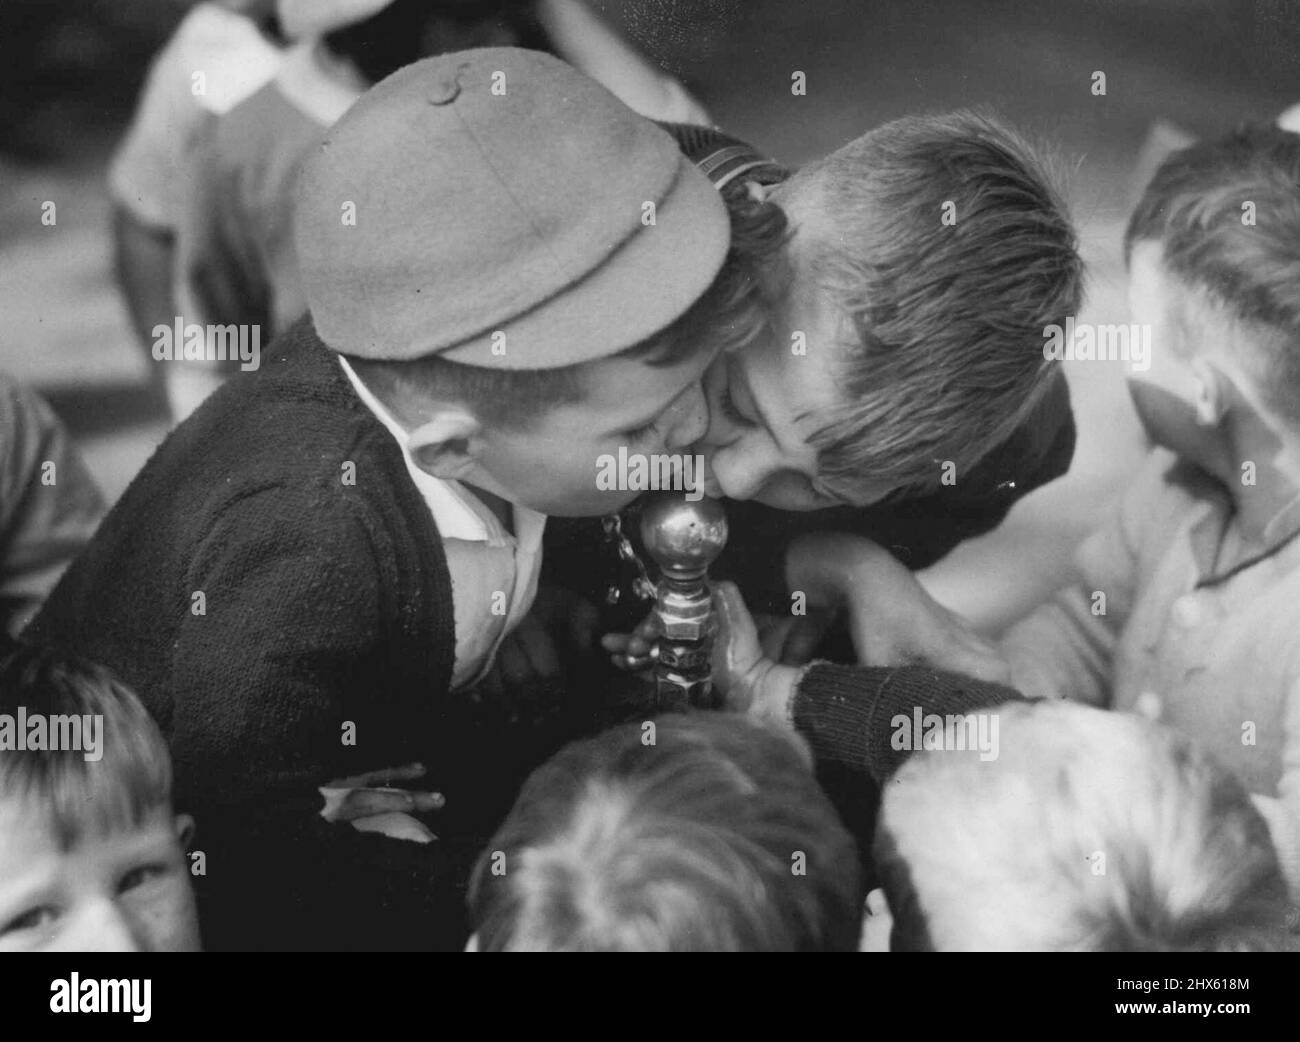 Thirst-Quencher for boys of the Erskineville Nursery School during their visit to the Botanic Gardens this morning. May 10, 1946.;Thirst-Quencher for boys of the Erskineville Nursery School during their visit to the Botanic Gardens this morning. Stock Photo